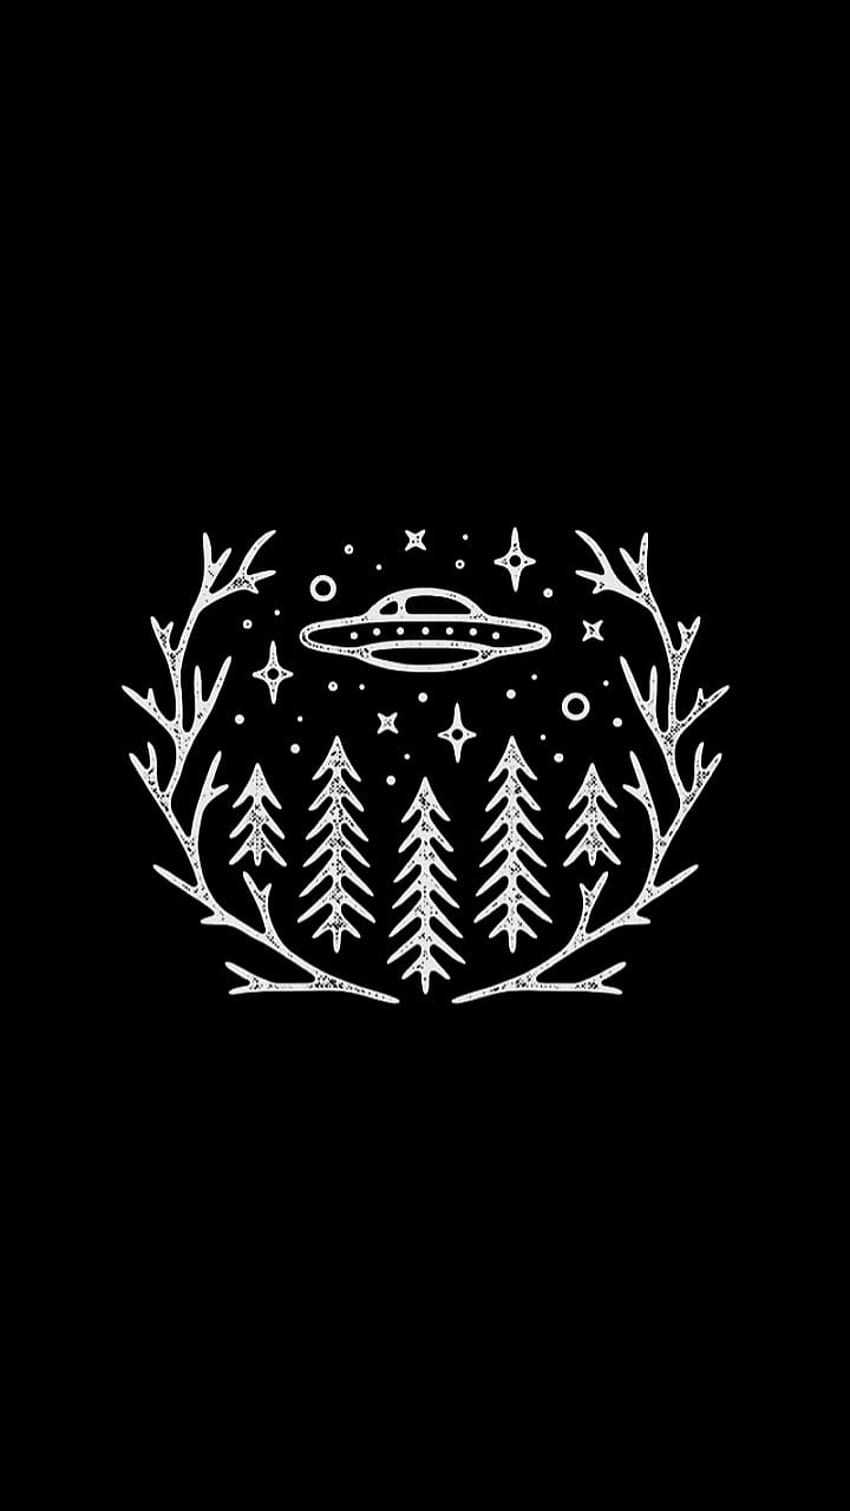 The forest and ufo logo - Alien